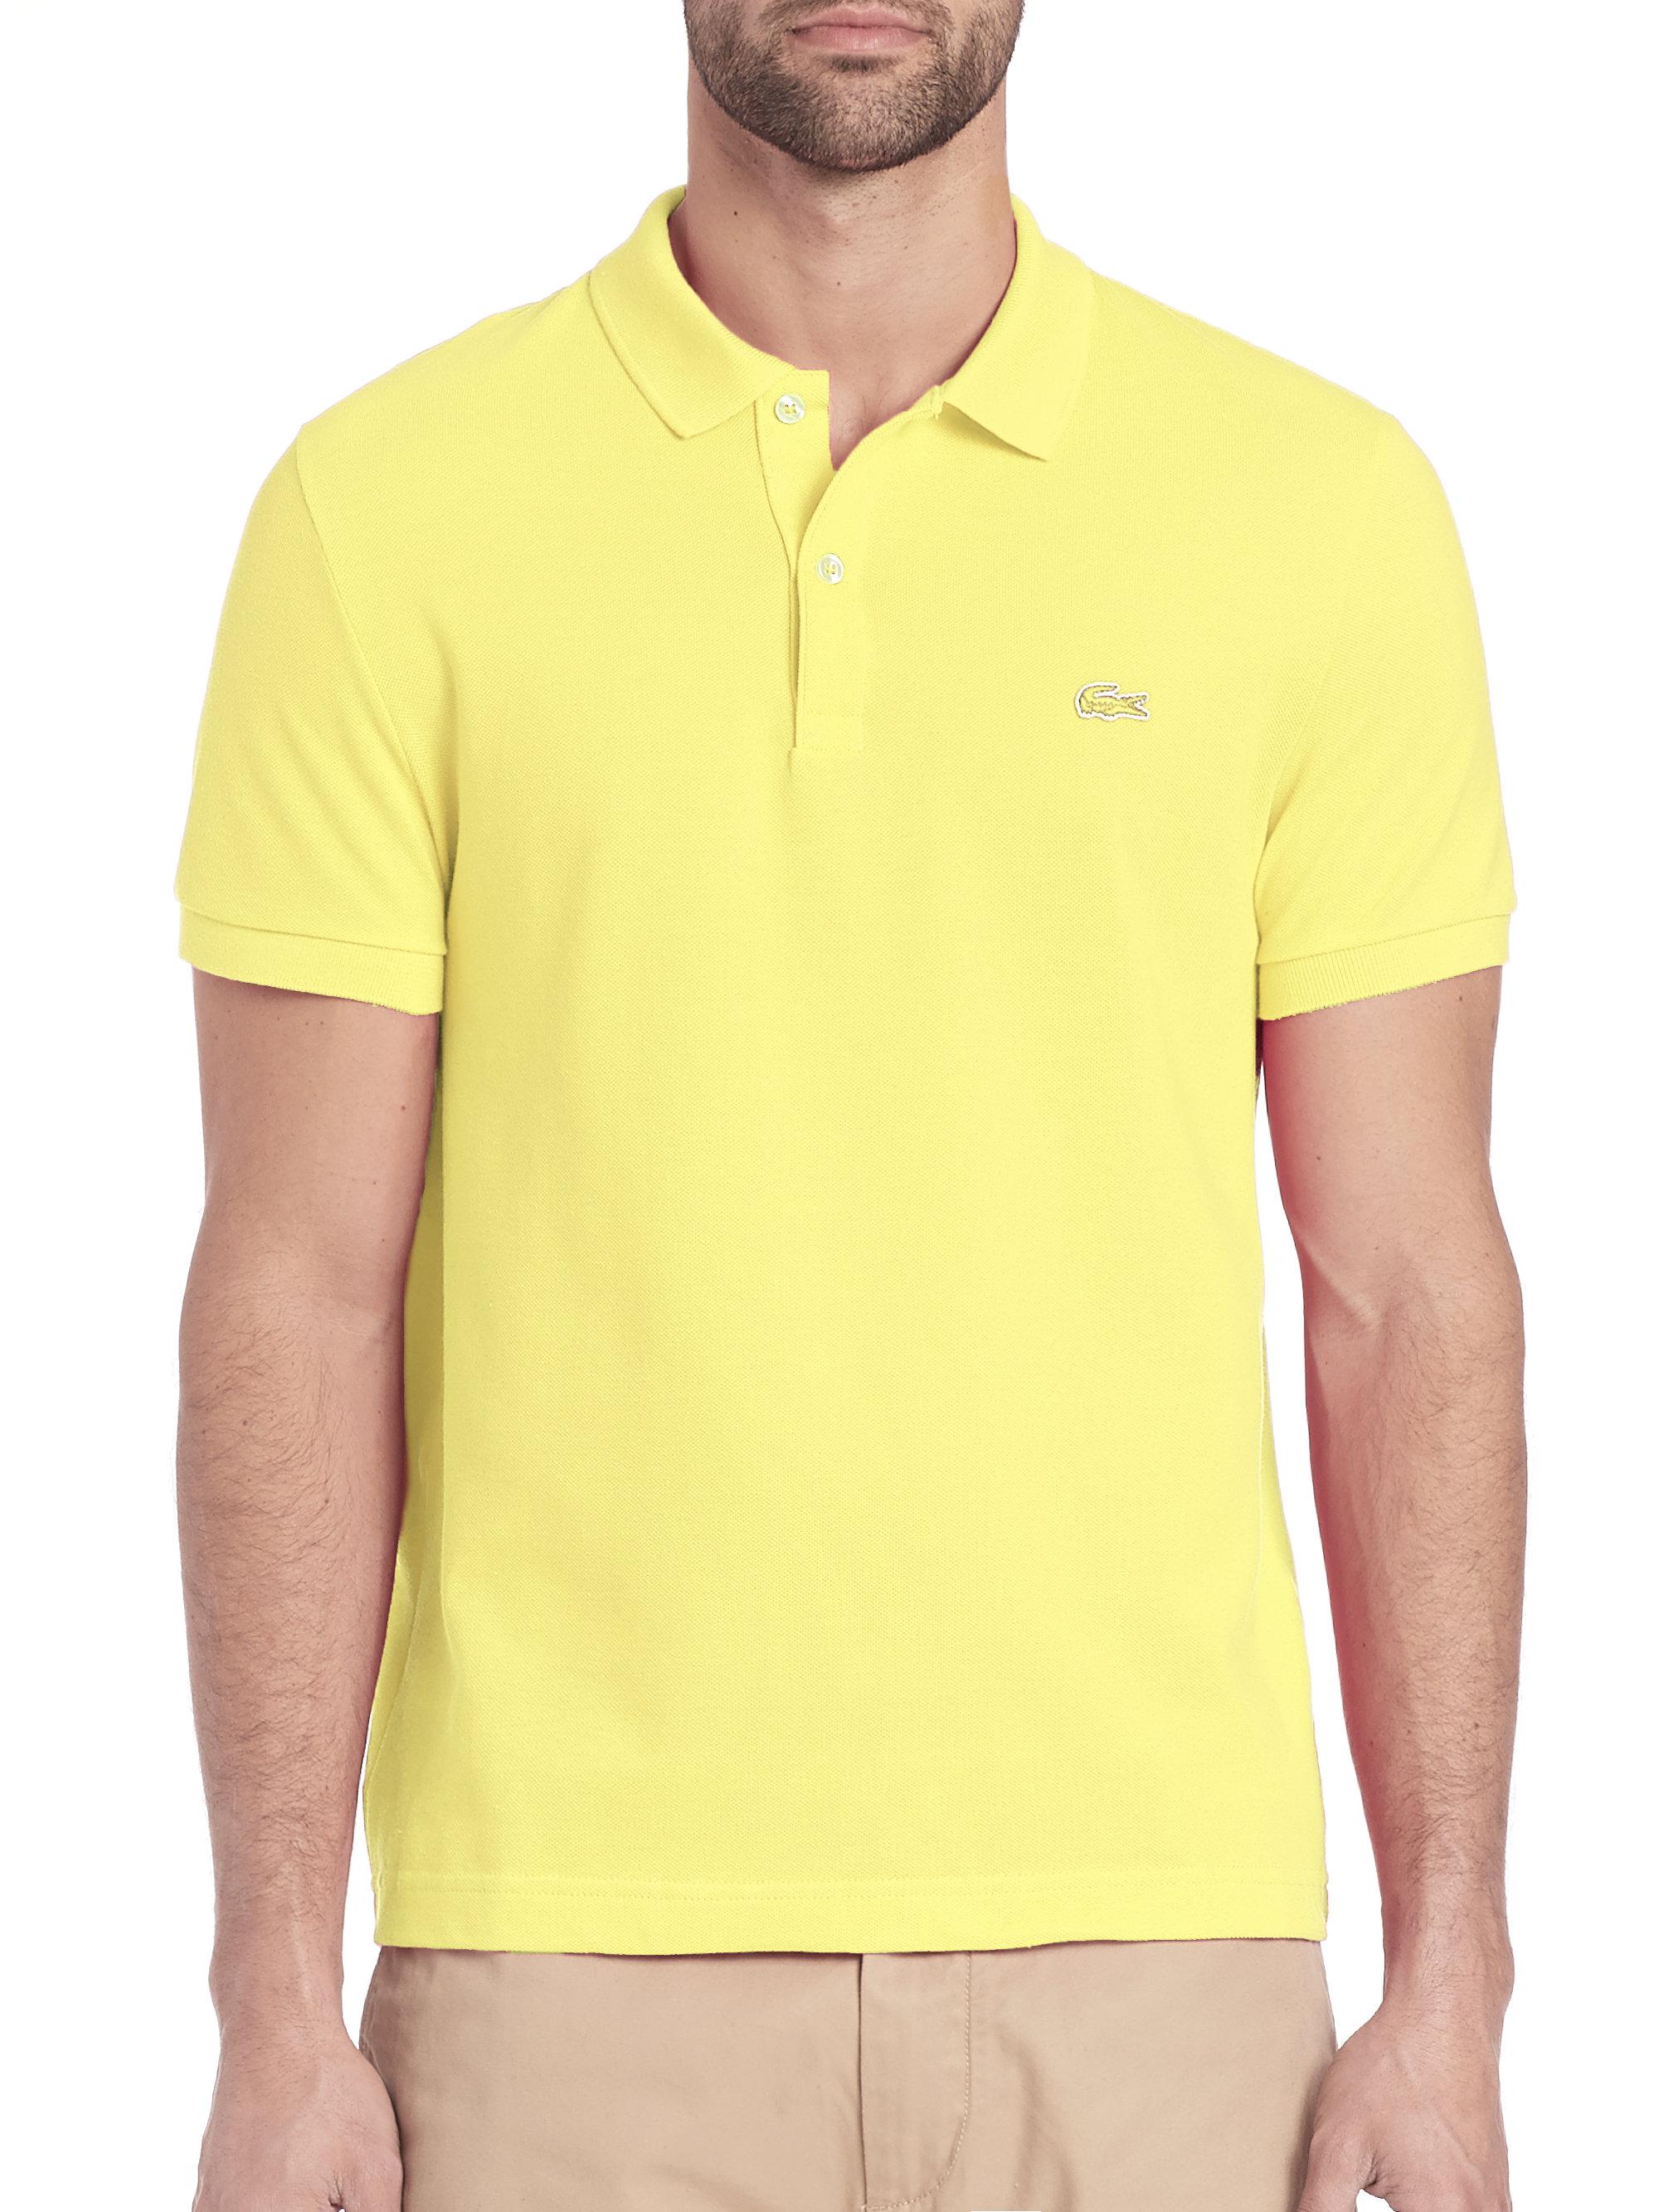 Lyst Lacoste Tonal Croc Polo in Yellow for Men